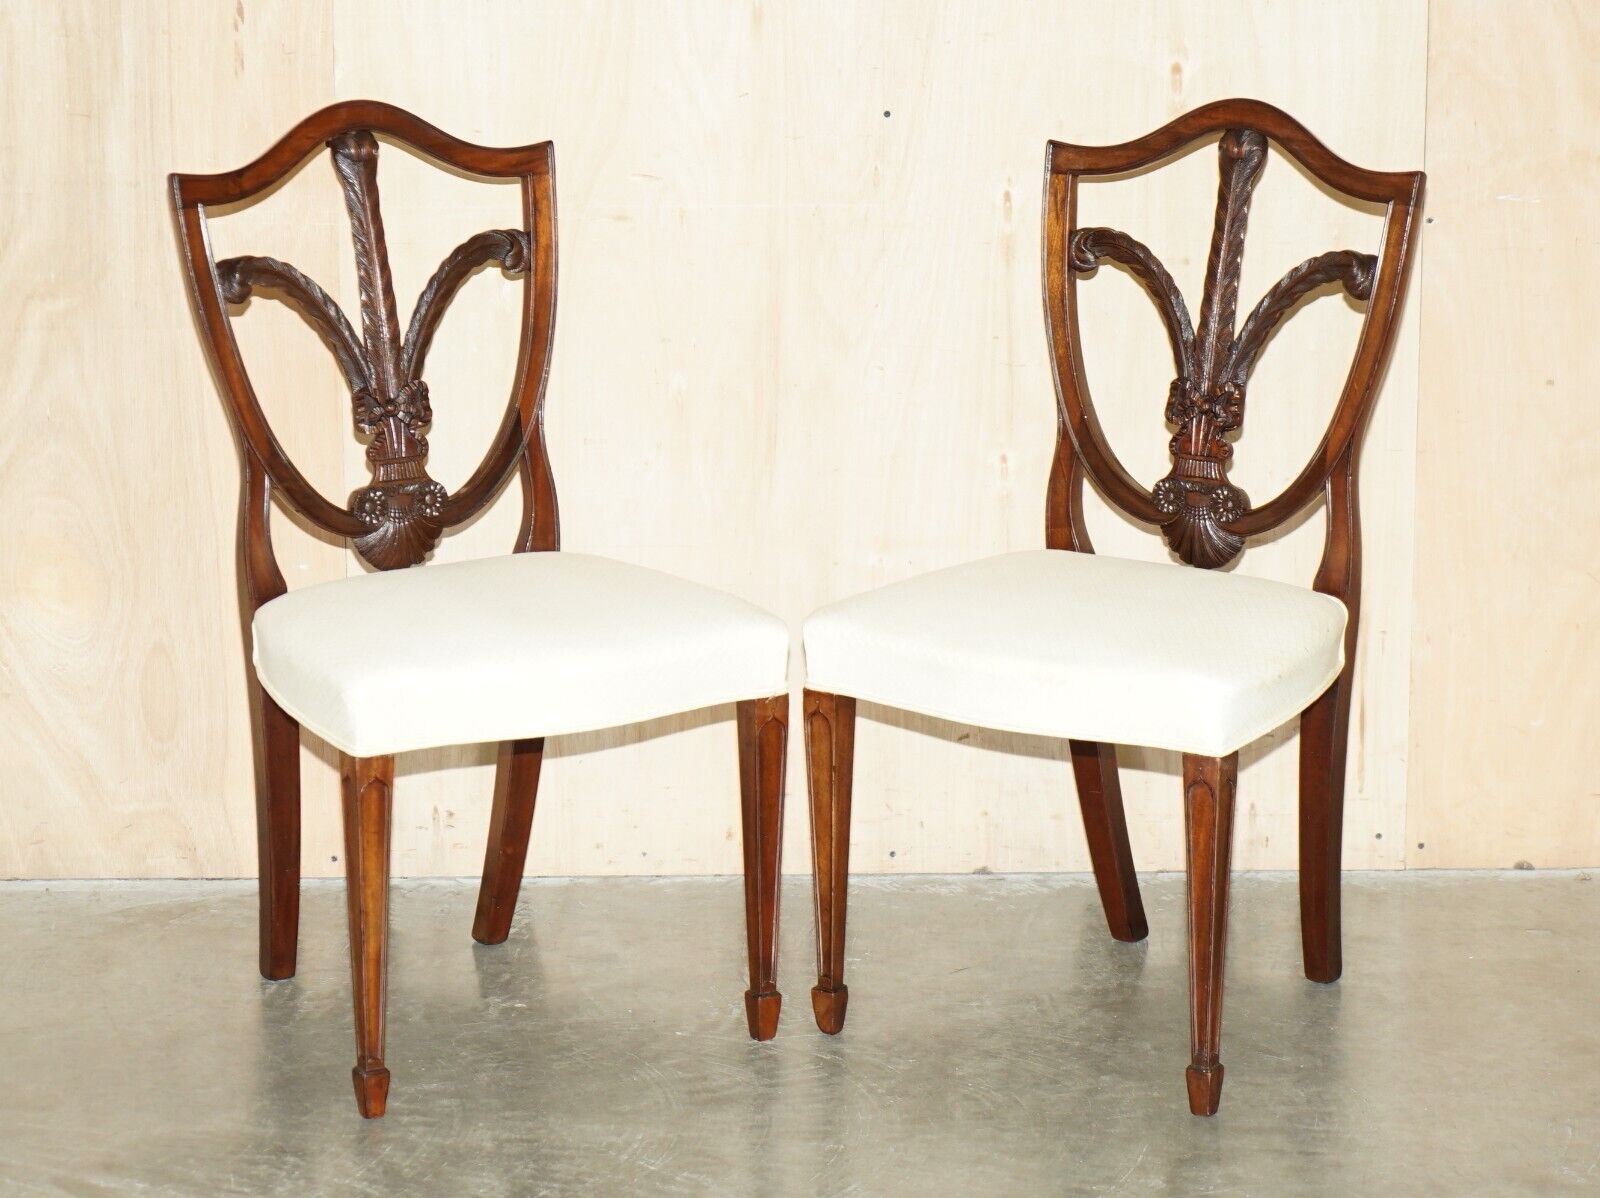 FINE PAIR OF ANTIQUE VICTORIAN GEORGE HEPPLEWHITE PRINCE OF WALES SIDE CHAIRS